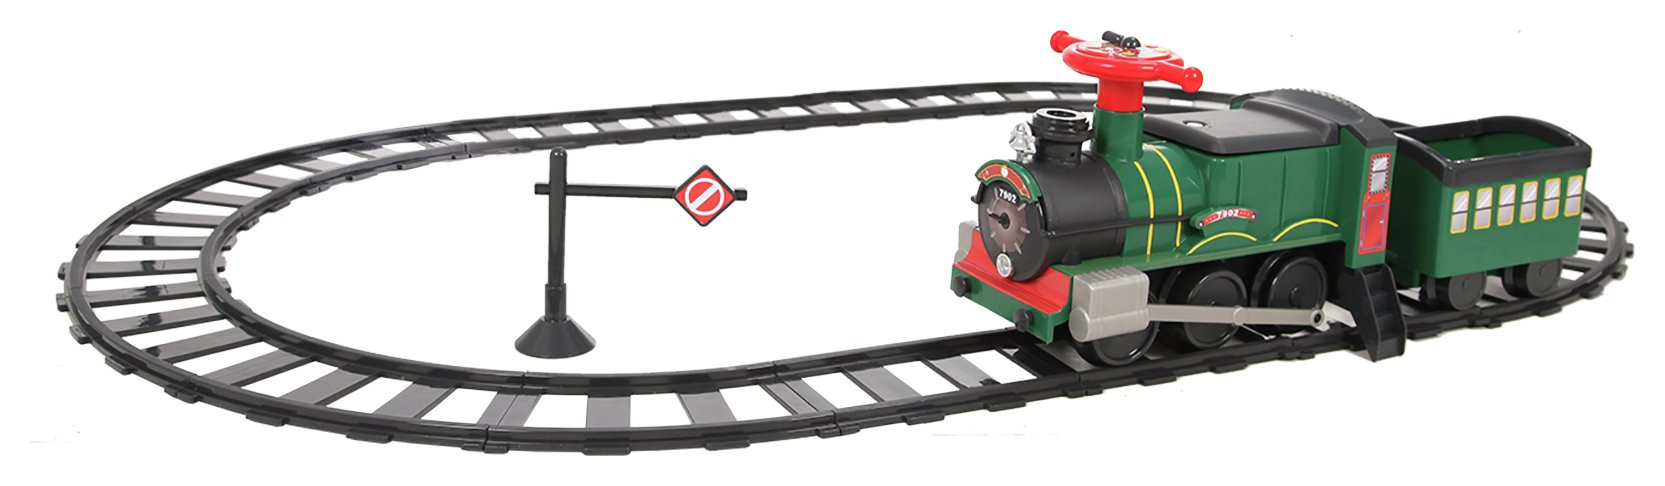 ride on train and track set